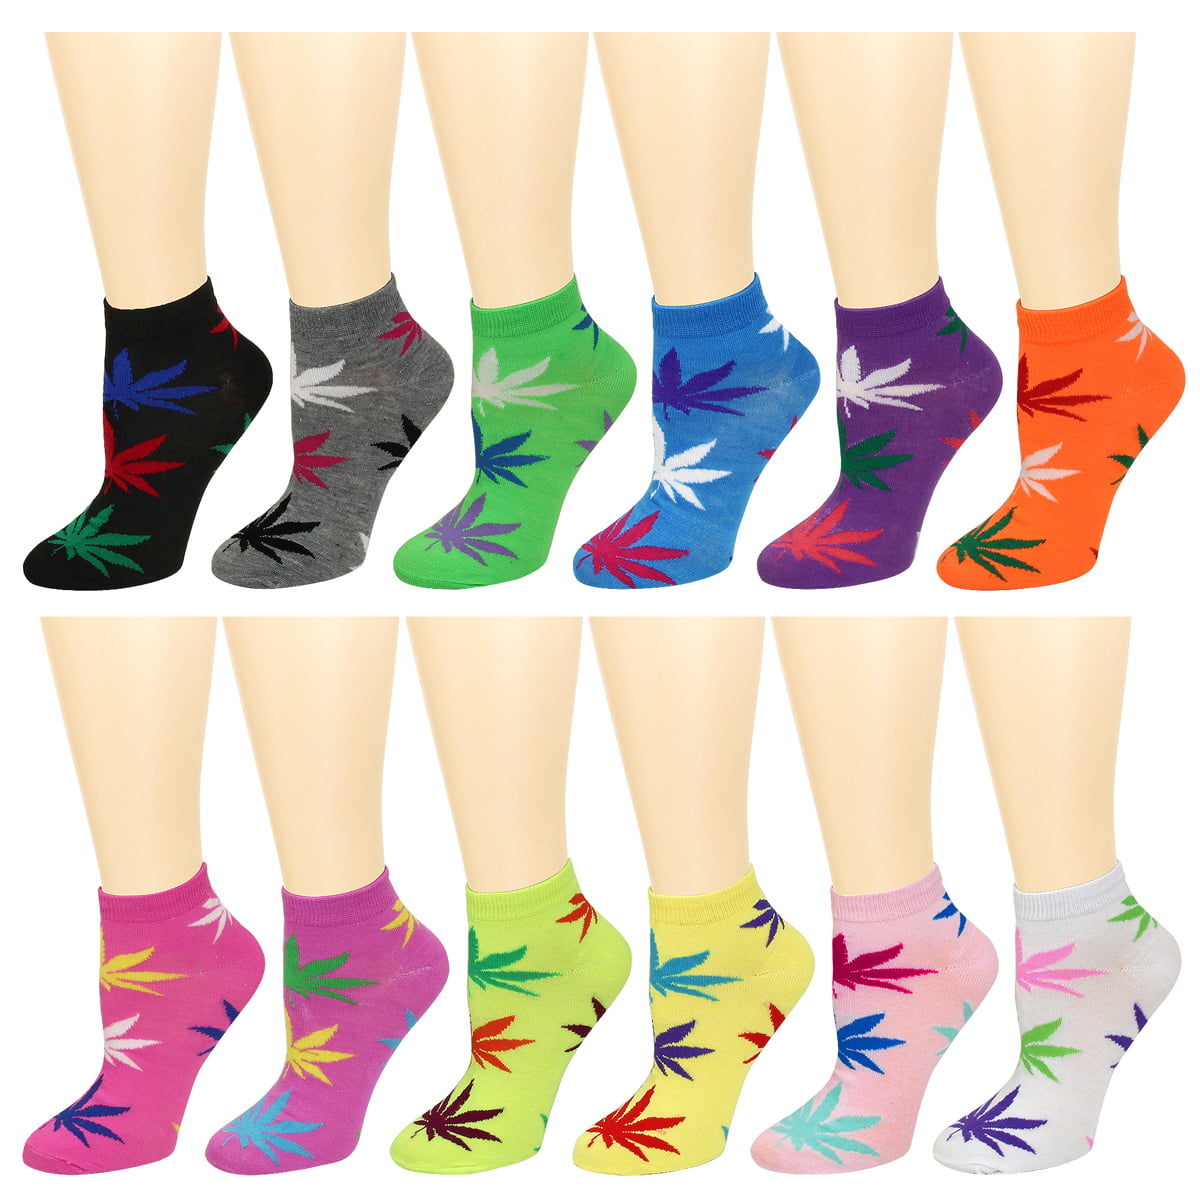 12 Pairs Women's Ankle Socks Size 9-11 Assorted Colors Leaves - DukeCityHerbs